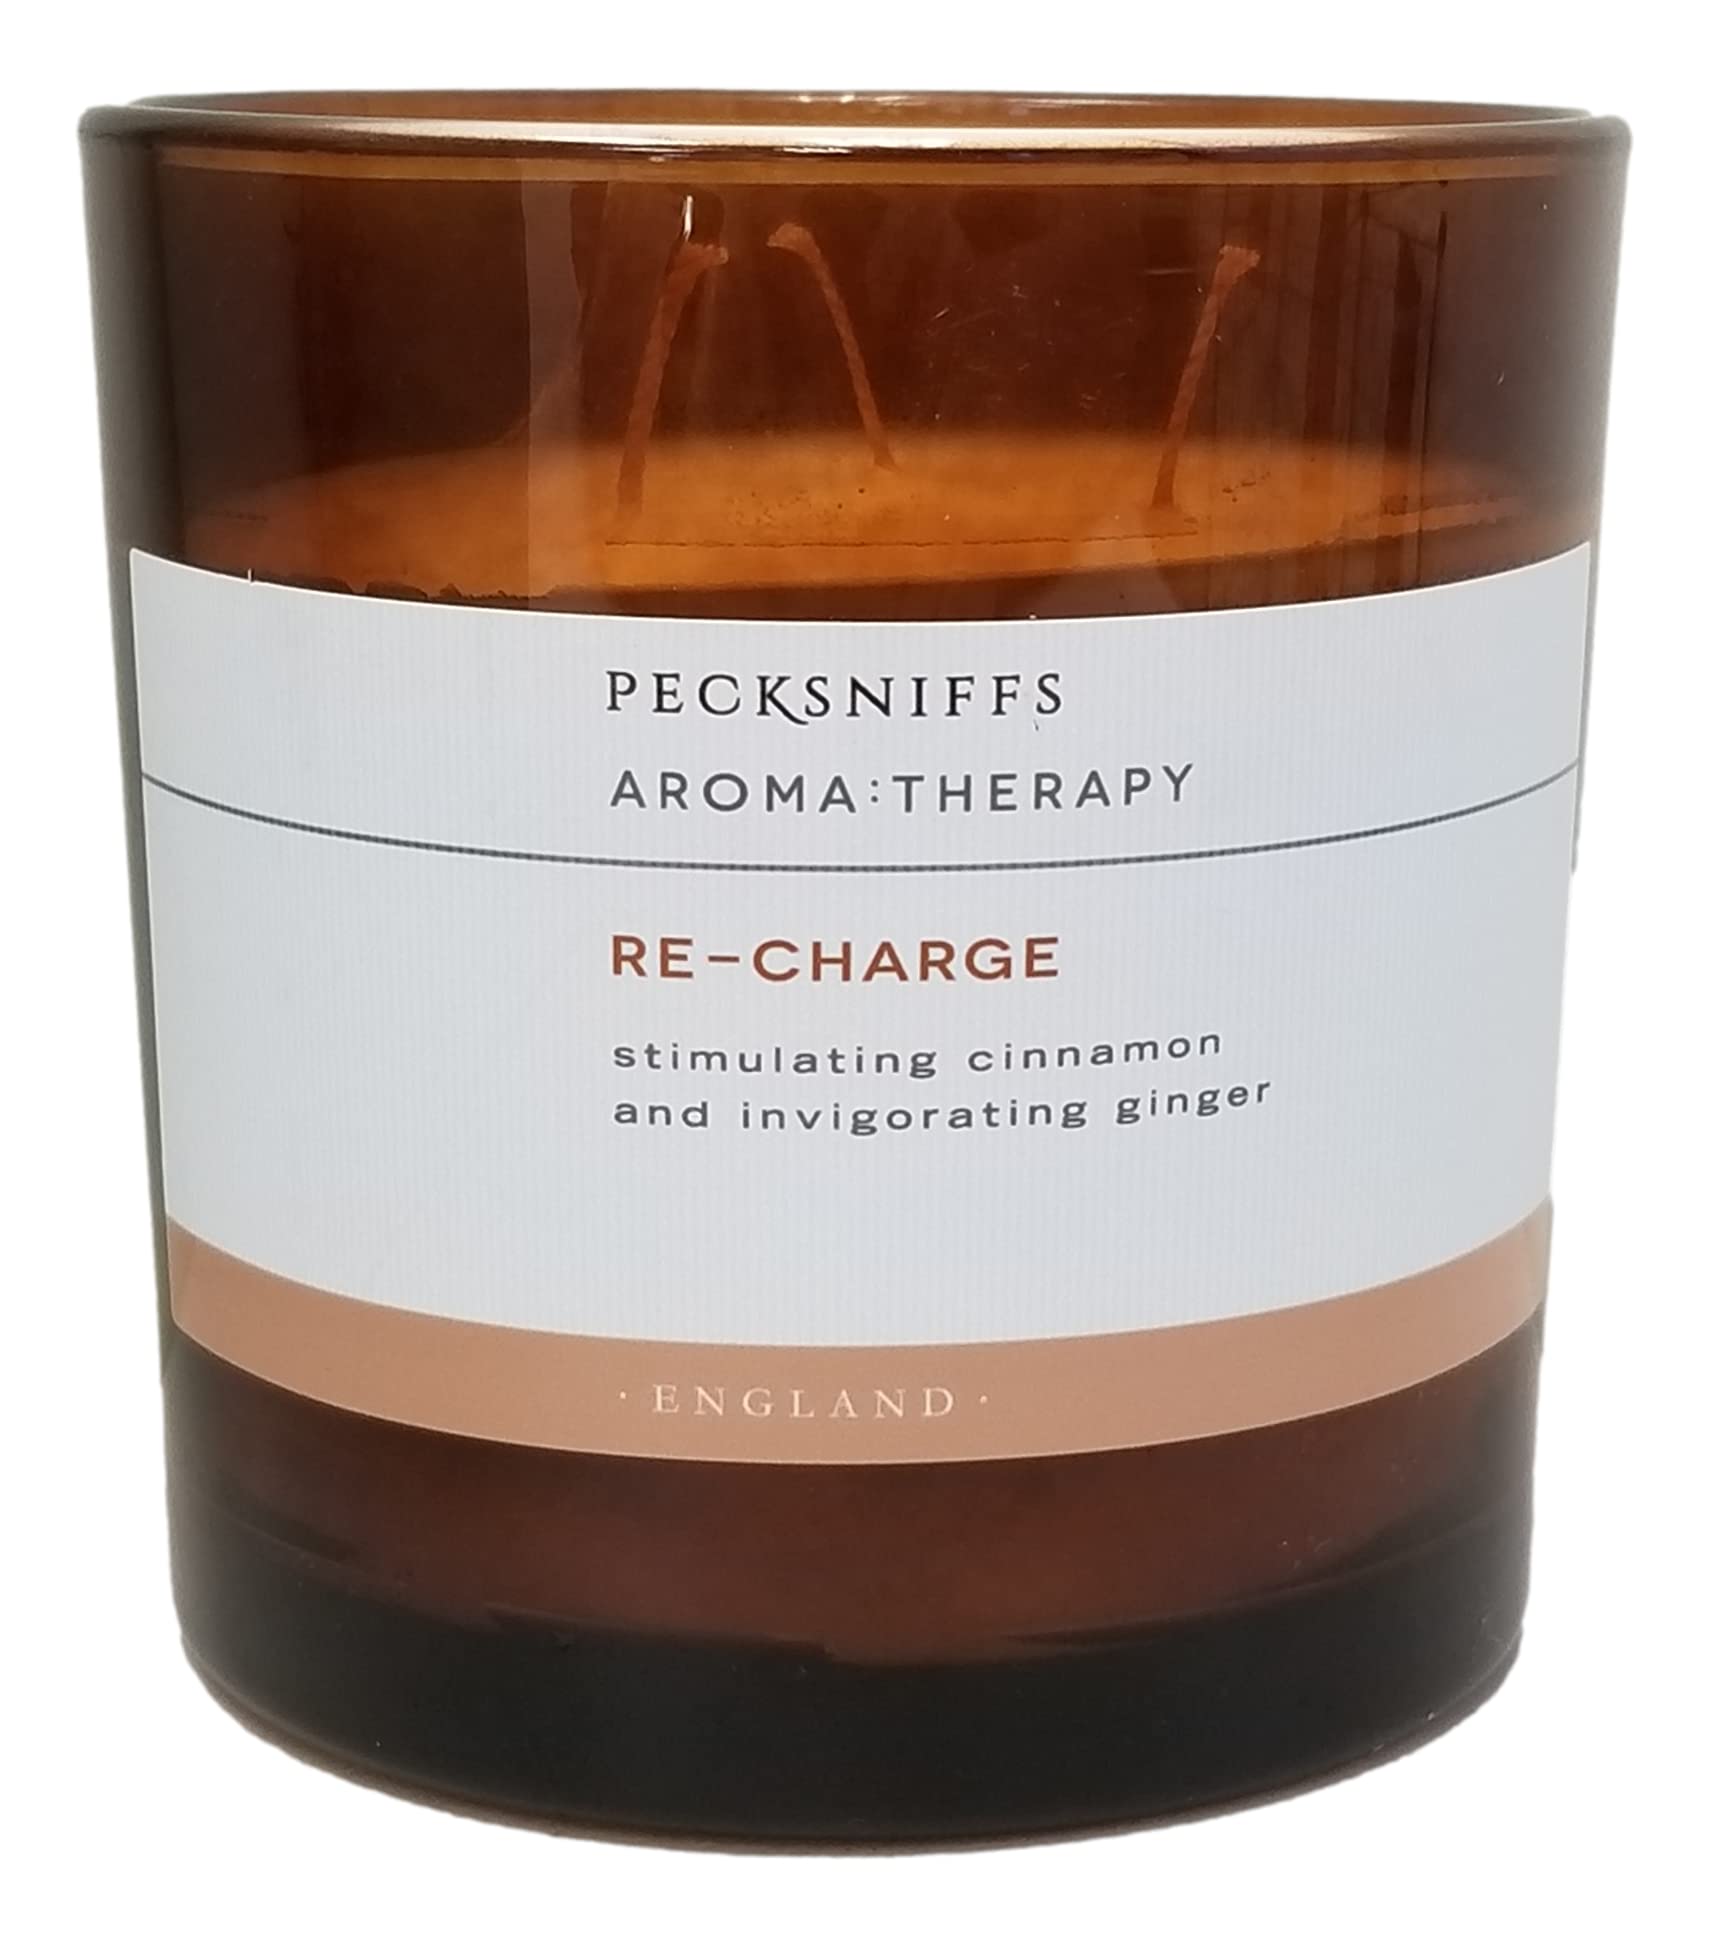 Pecksniffs Re-Charge Cinnamon & Ginger Scented Candle, Large Triple Wick, 18.1 Oz